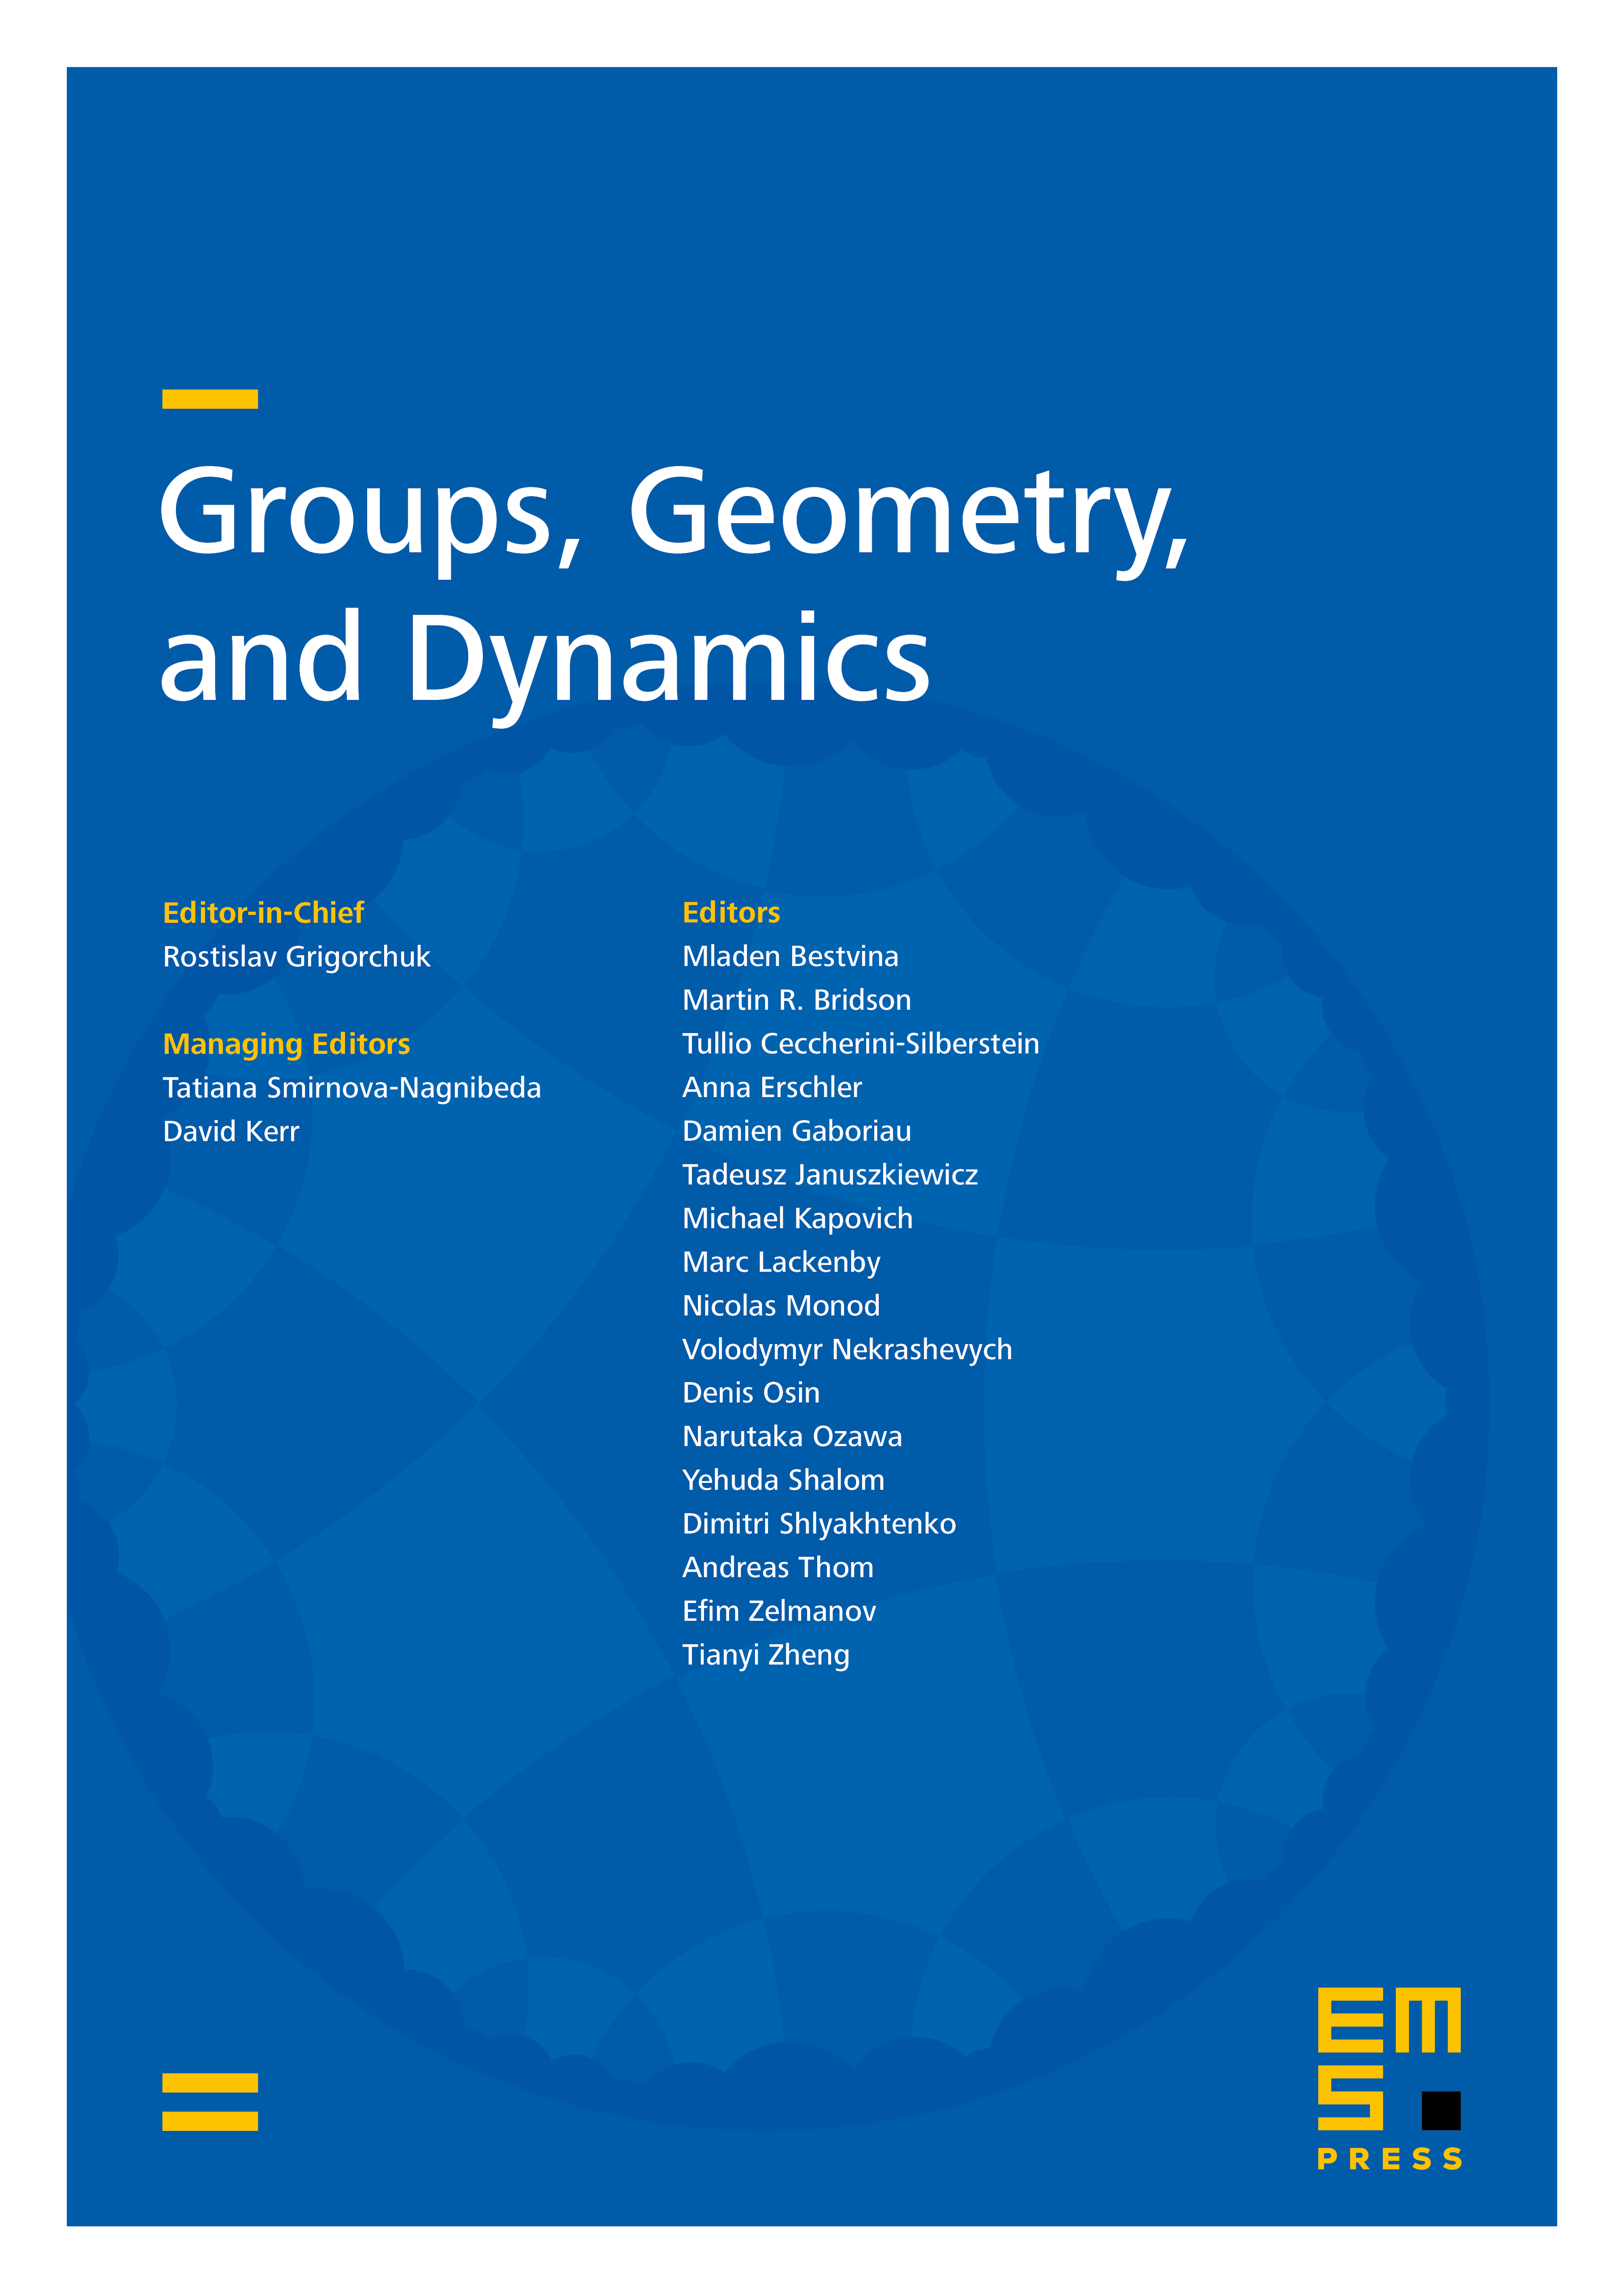 Generation and simplicity in the airplane rearrangement group cover